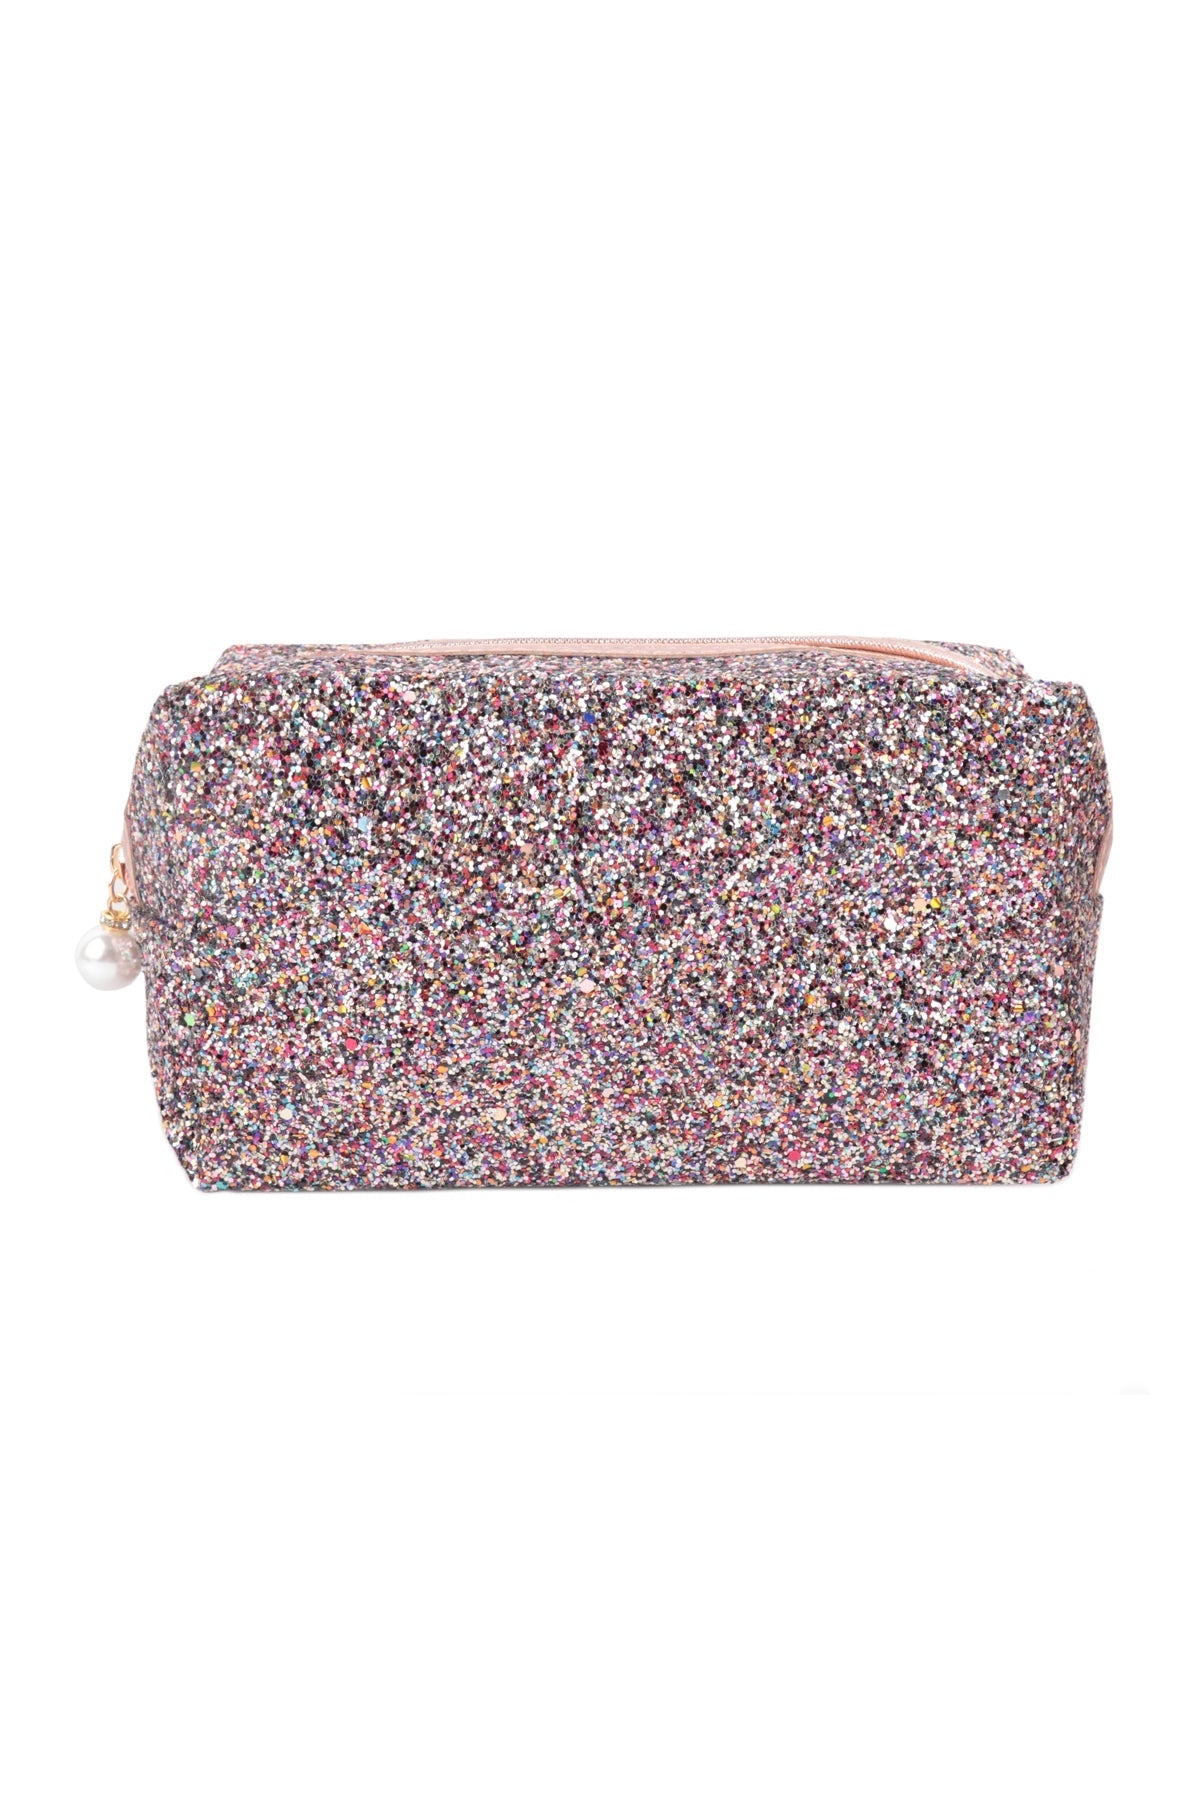 This is a glitter makeup bag with pearl zipper Zipper top These cute make-up bags will not last long!